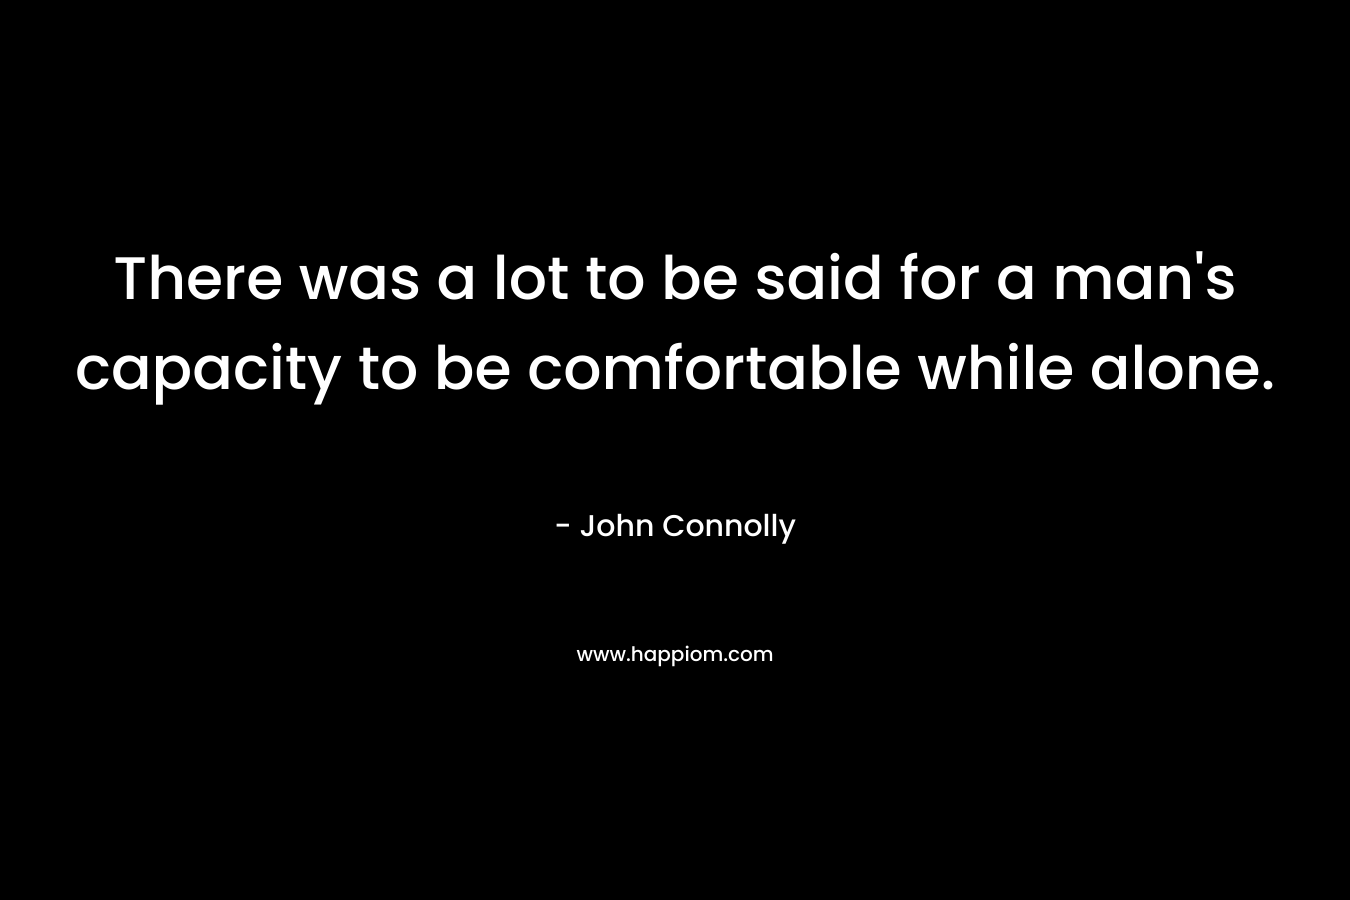 There was a lot to be said for a man’s capacity to be comfortable while alone. – John Connolly